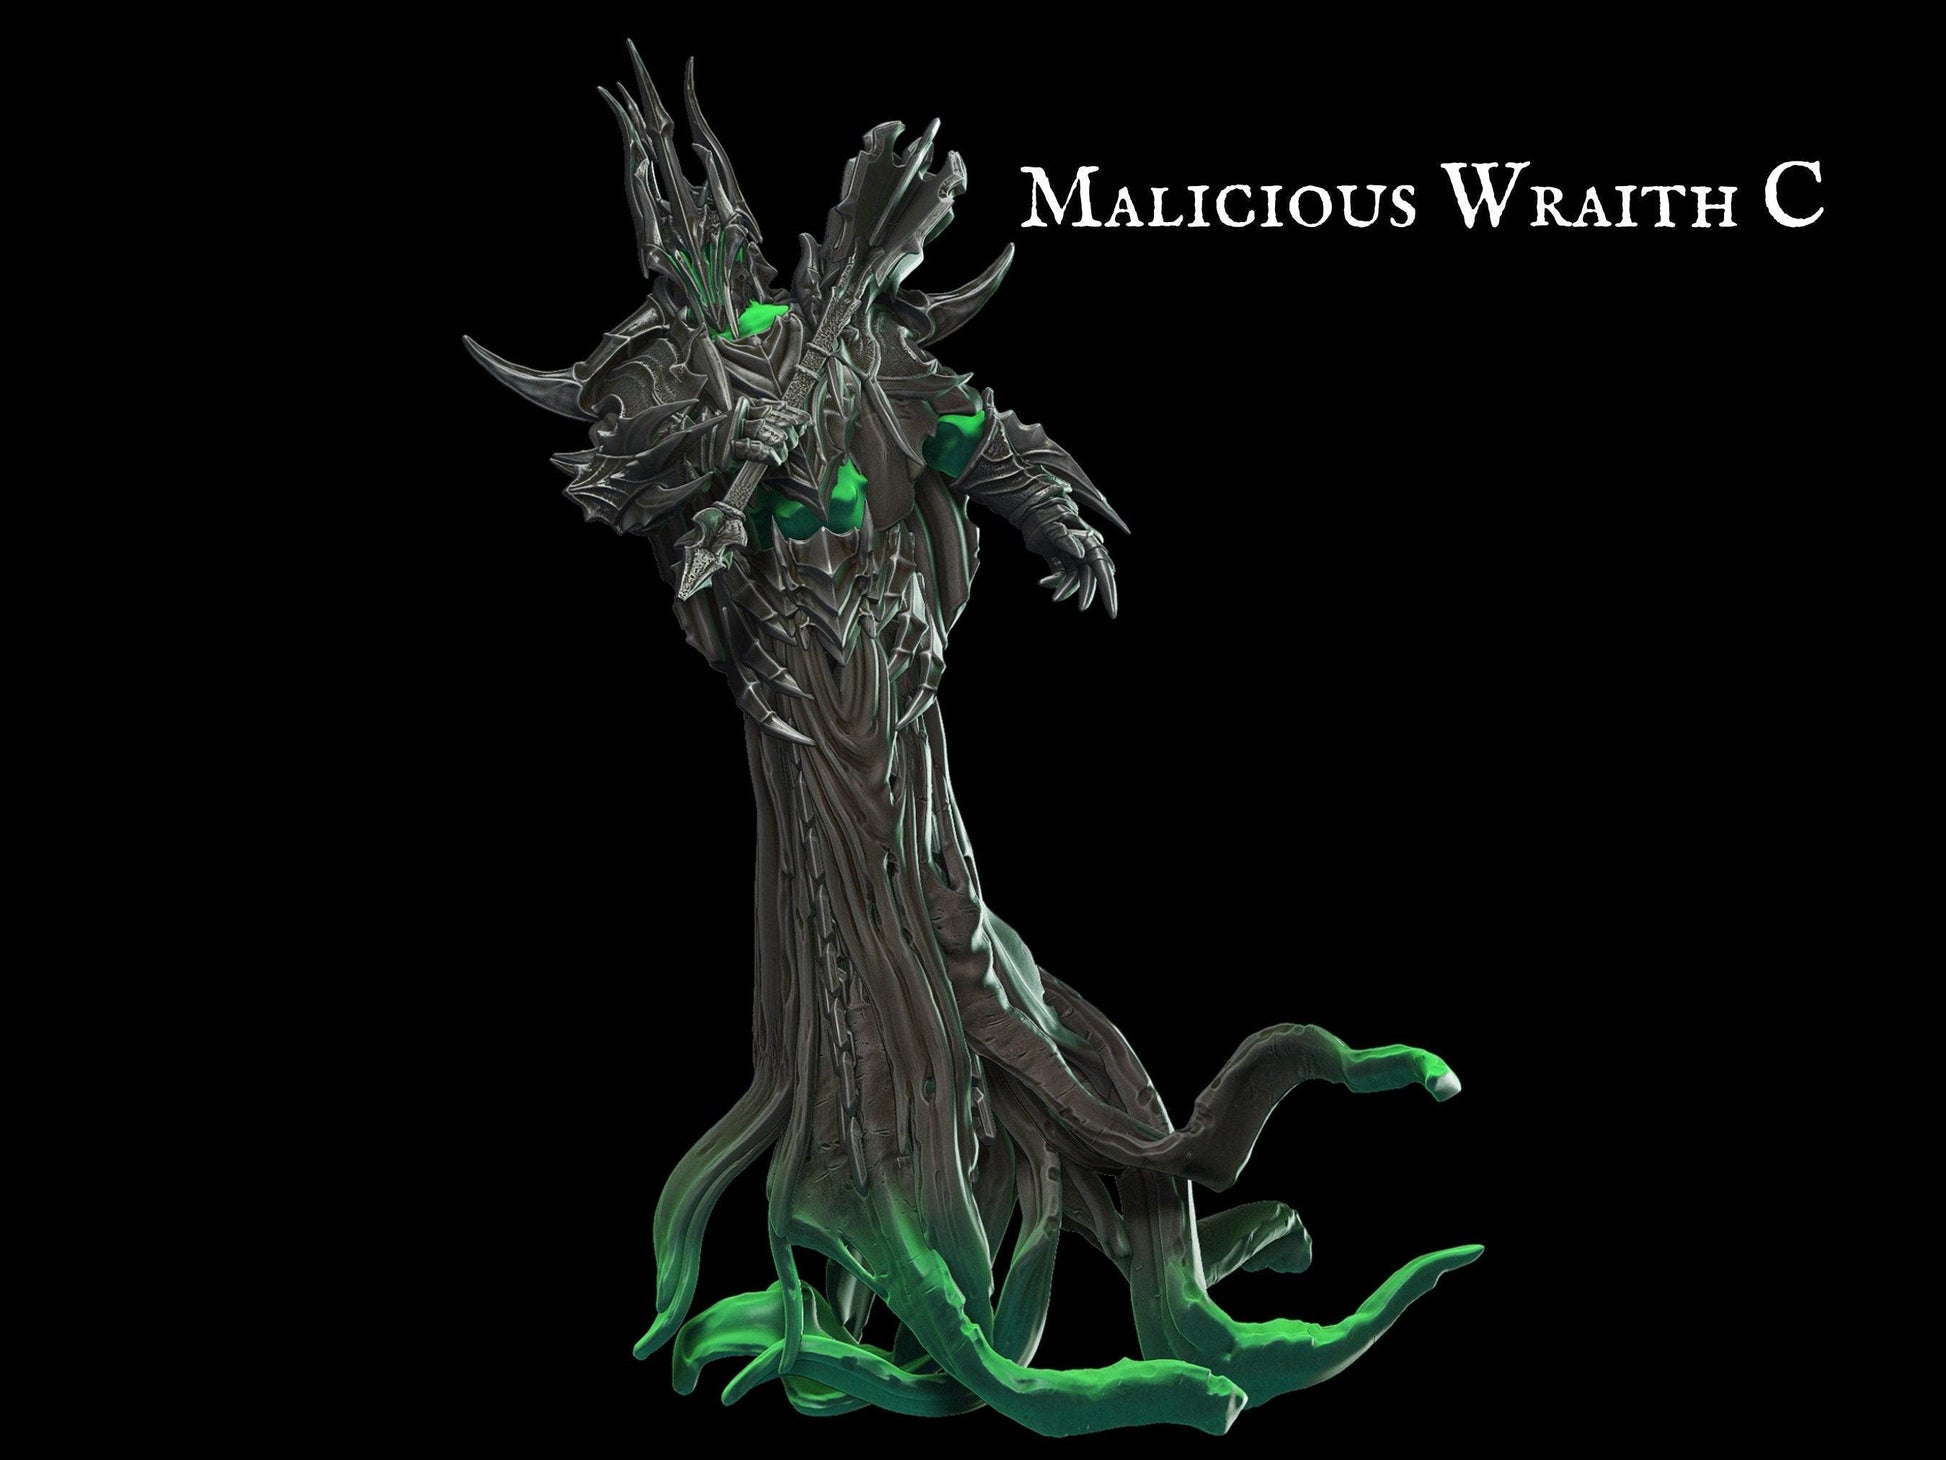 DnD Malicious Wraith Miniature - 3 Poses - 28mm scale Tabletop gaming DnD Miniature Dungeons and Dragons, ttrpg dnd 5e dungeon master gift - Plague Miniatures shop for DnD Miniatures